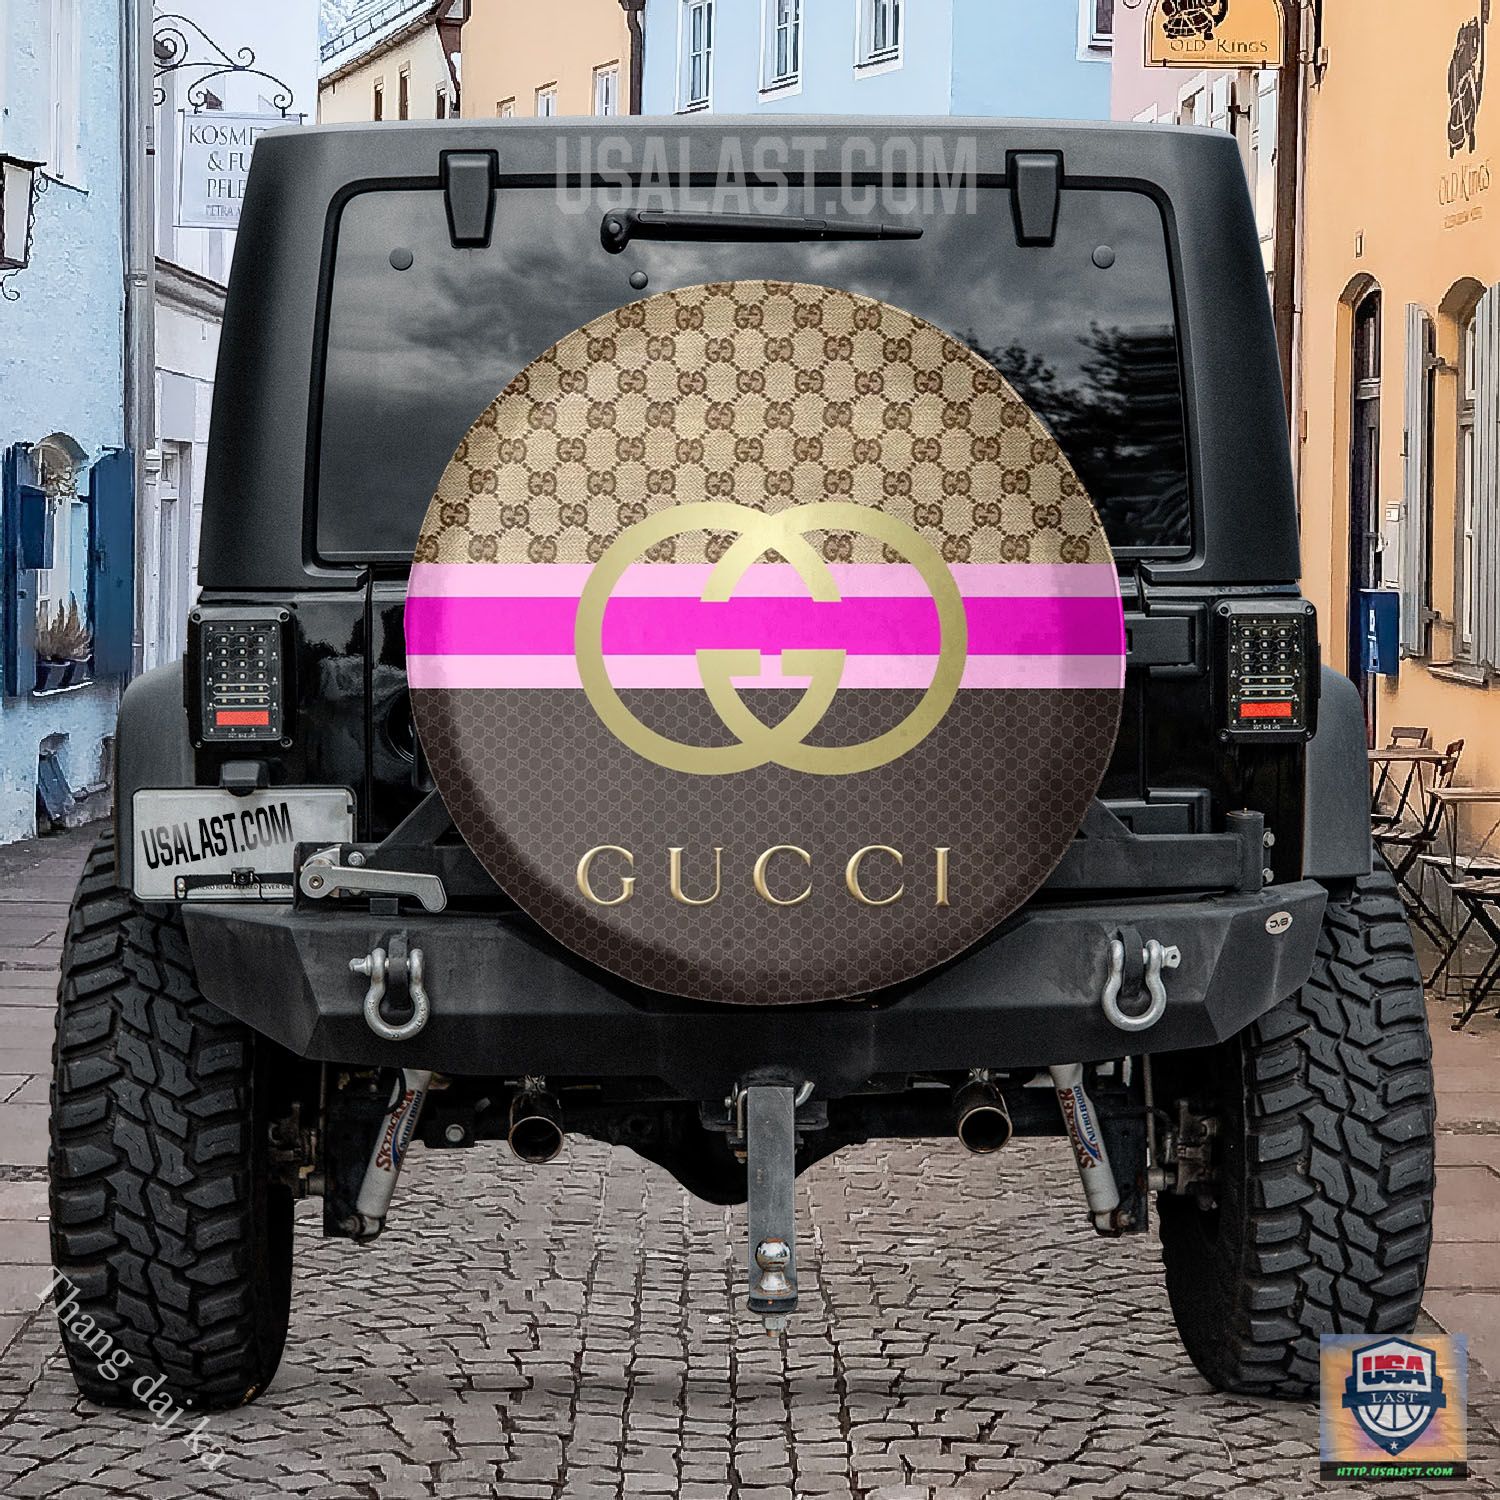 TDK260822-17xxxxGucci-Brown-Tan-Pink-Black-Gold-Spare-Tire-Covers-4.jpg